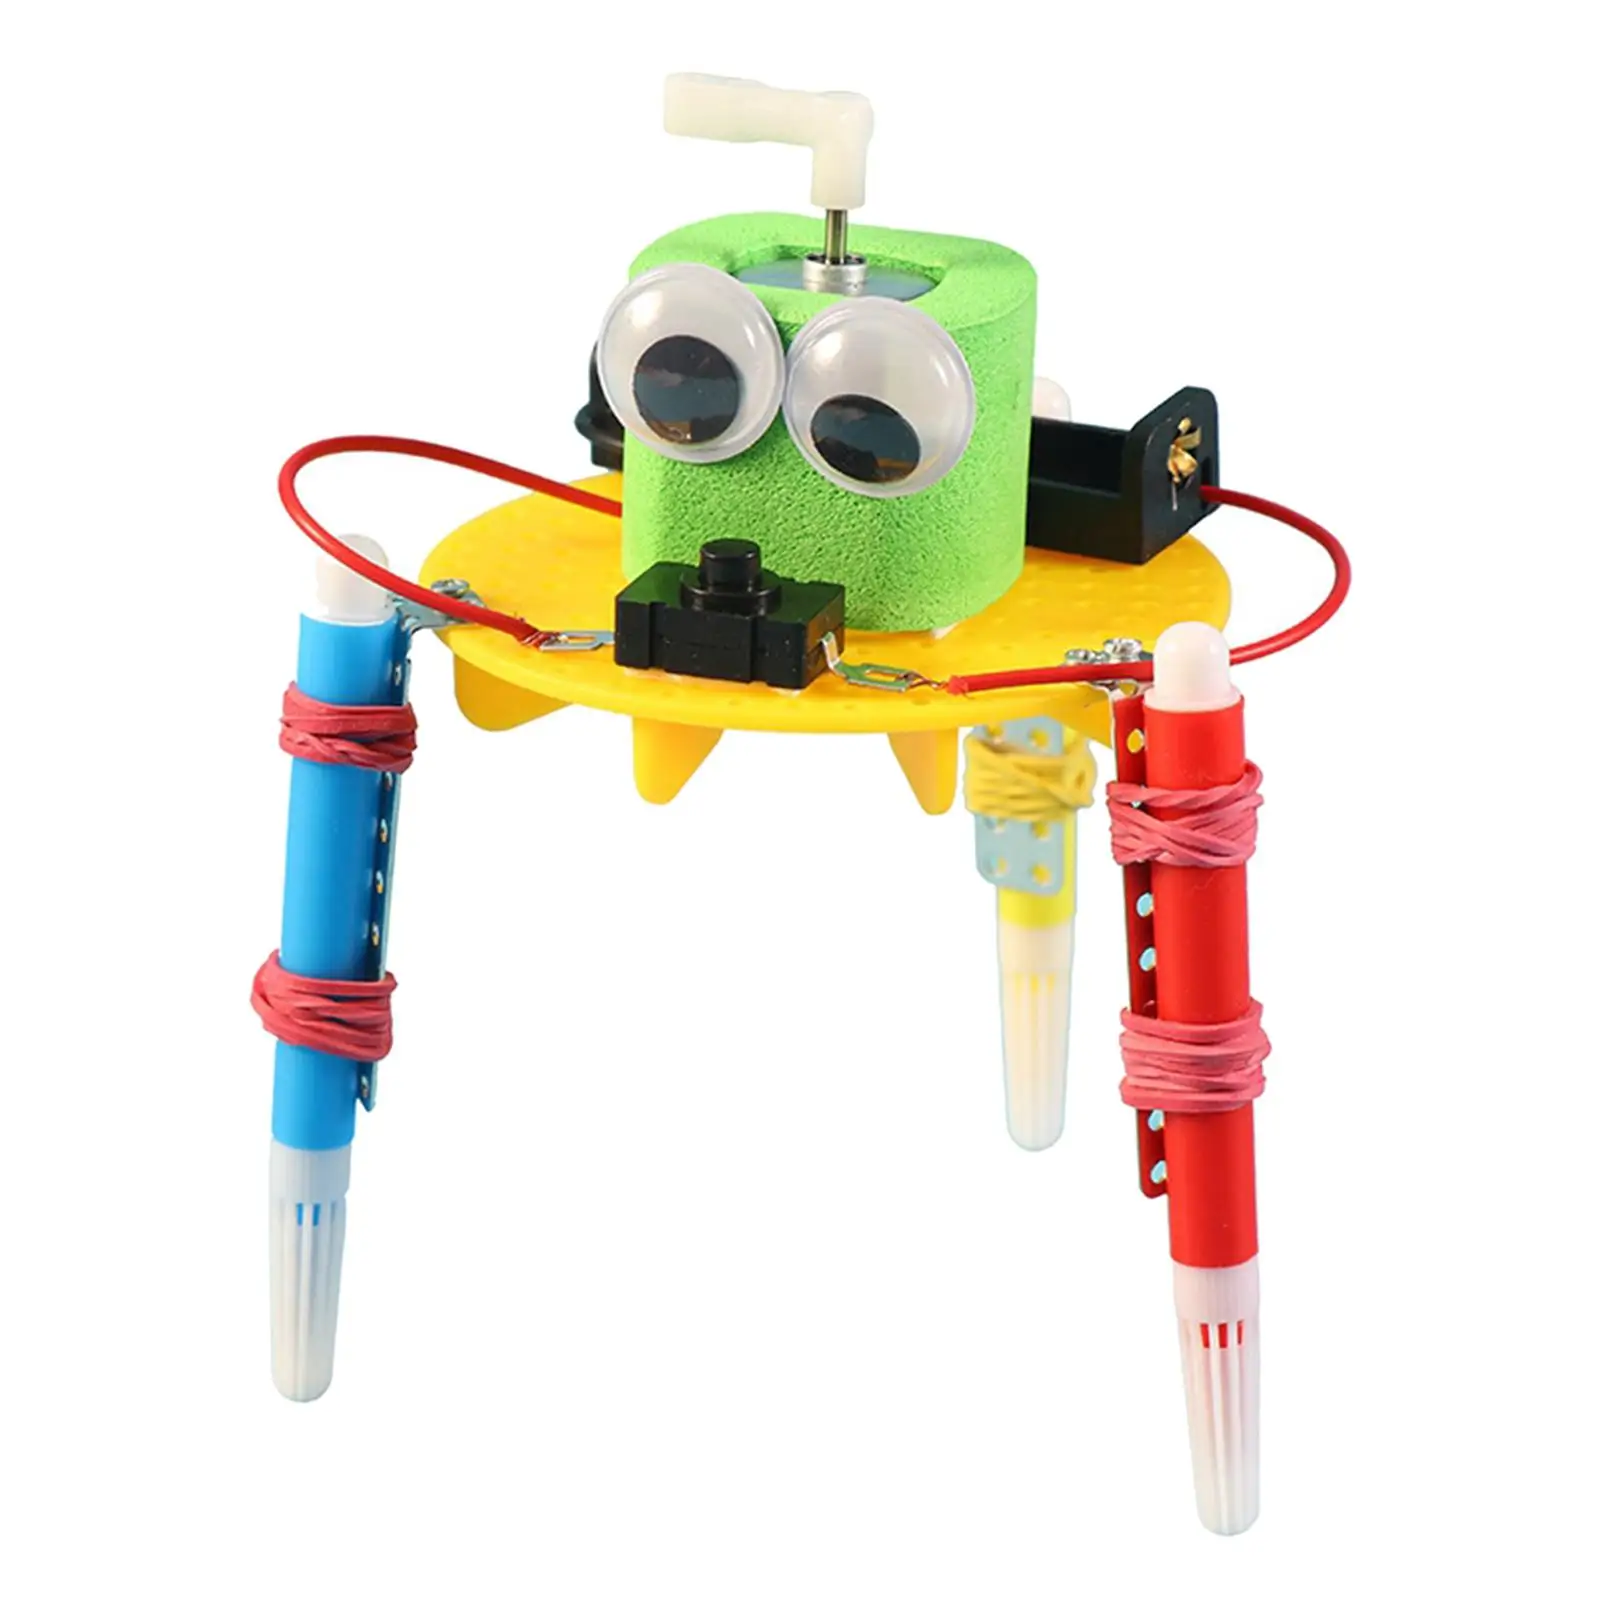 Early Learning DIY Doodle Robot Technology 3D Puzzle Model Experiment Toy Wooden science Kit for Girls Boys teens Gifts